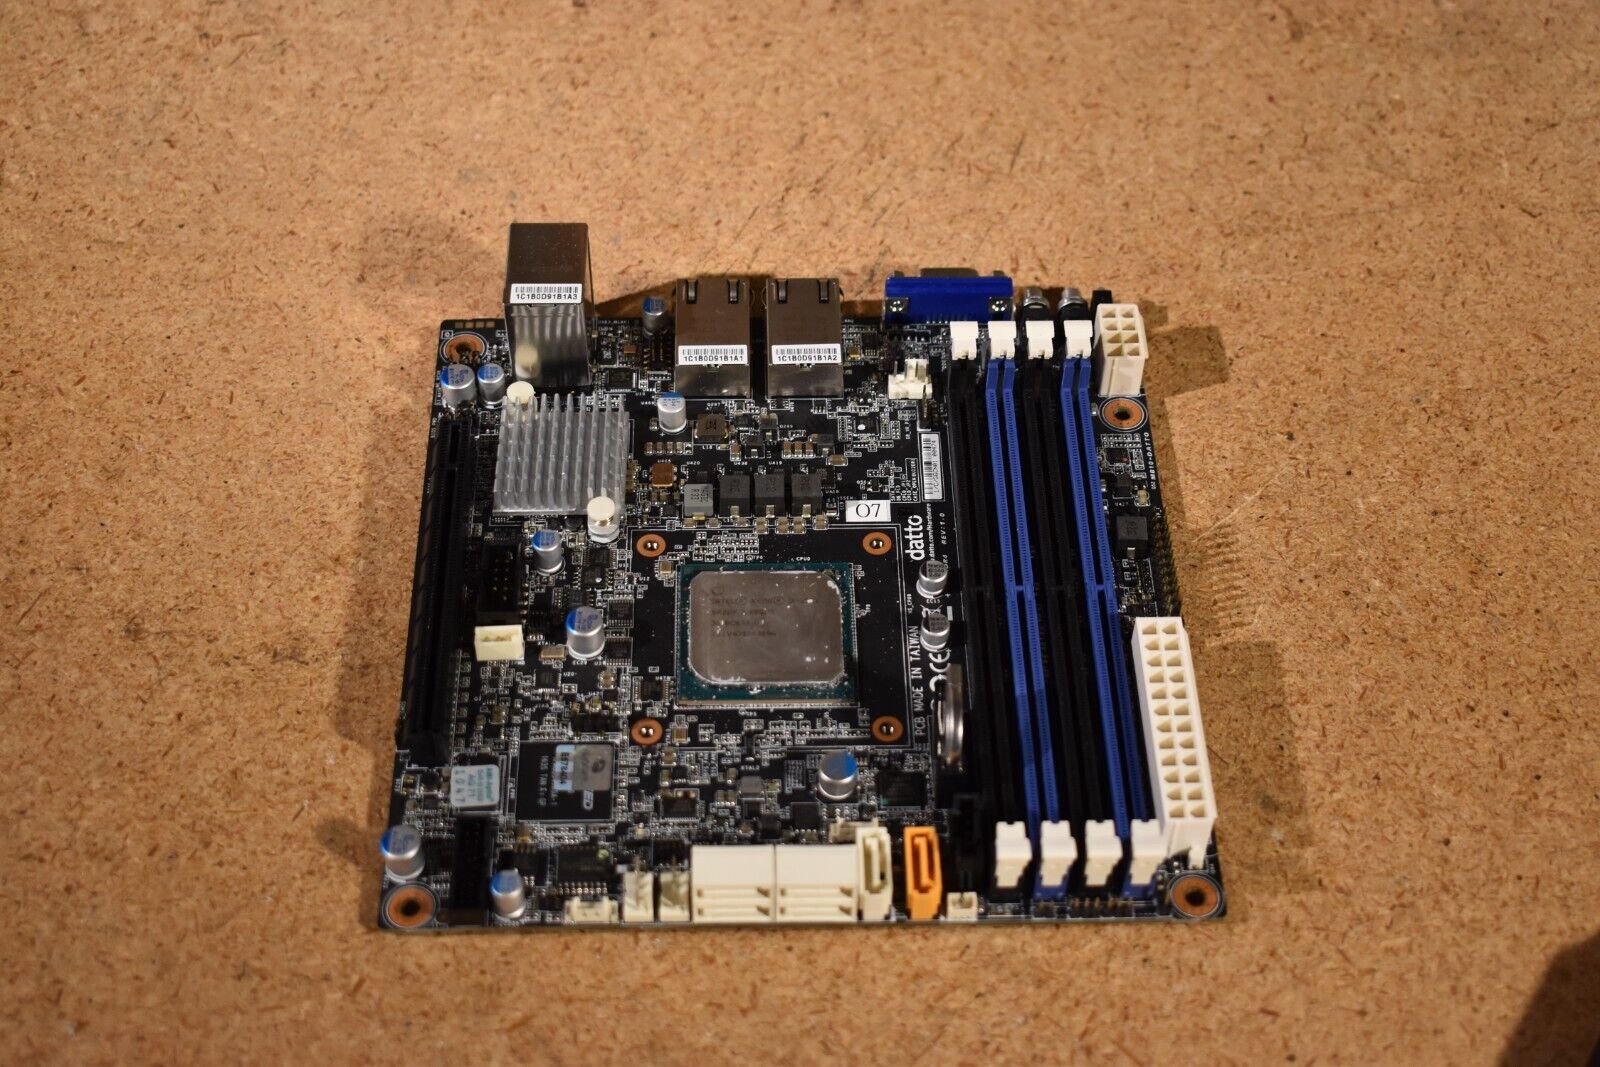 Datto Gigabyte MB10-DATTO MINI-ITX Motherboard Xeon D-1521 CPU FOR PARTS/REPAIR